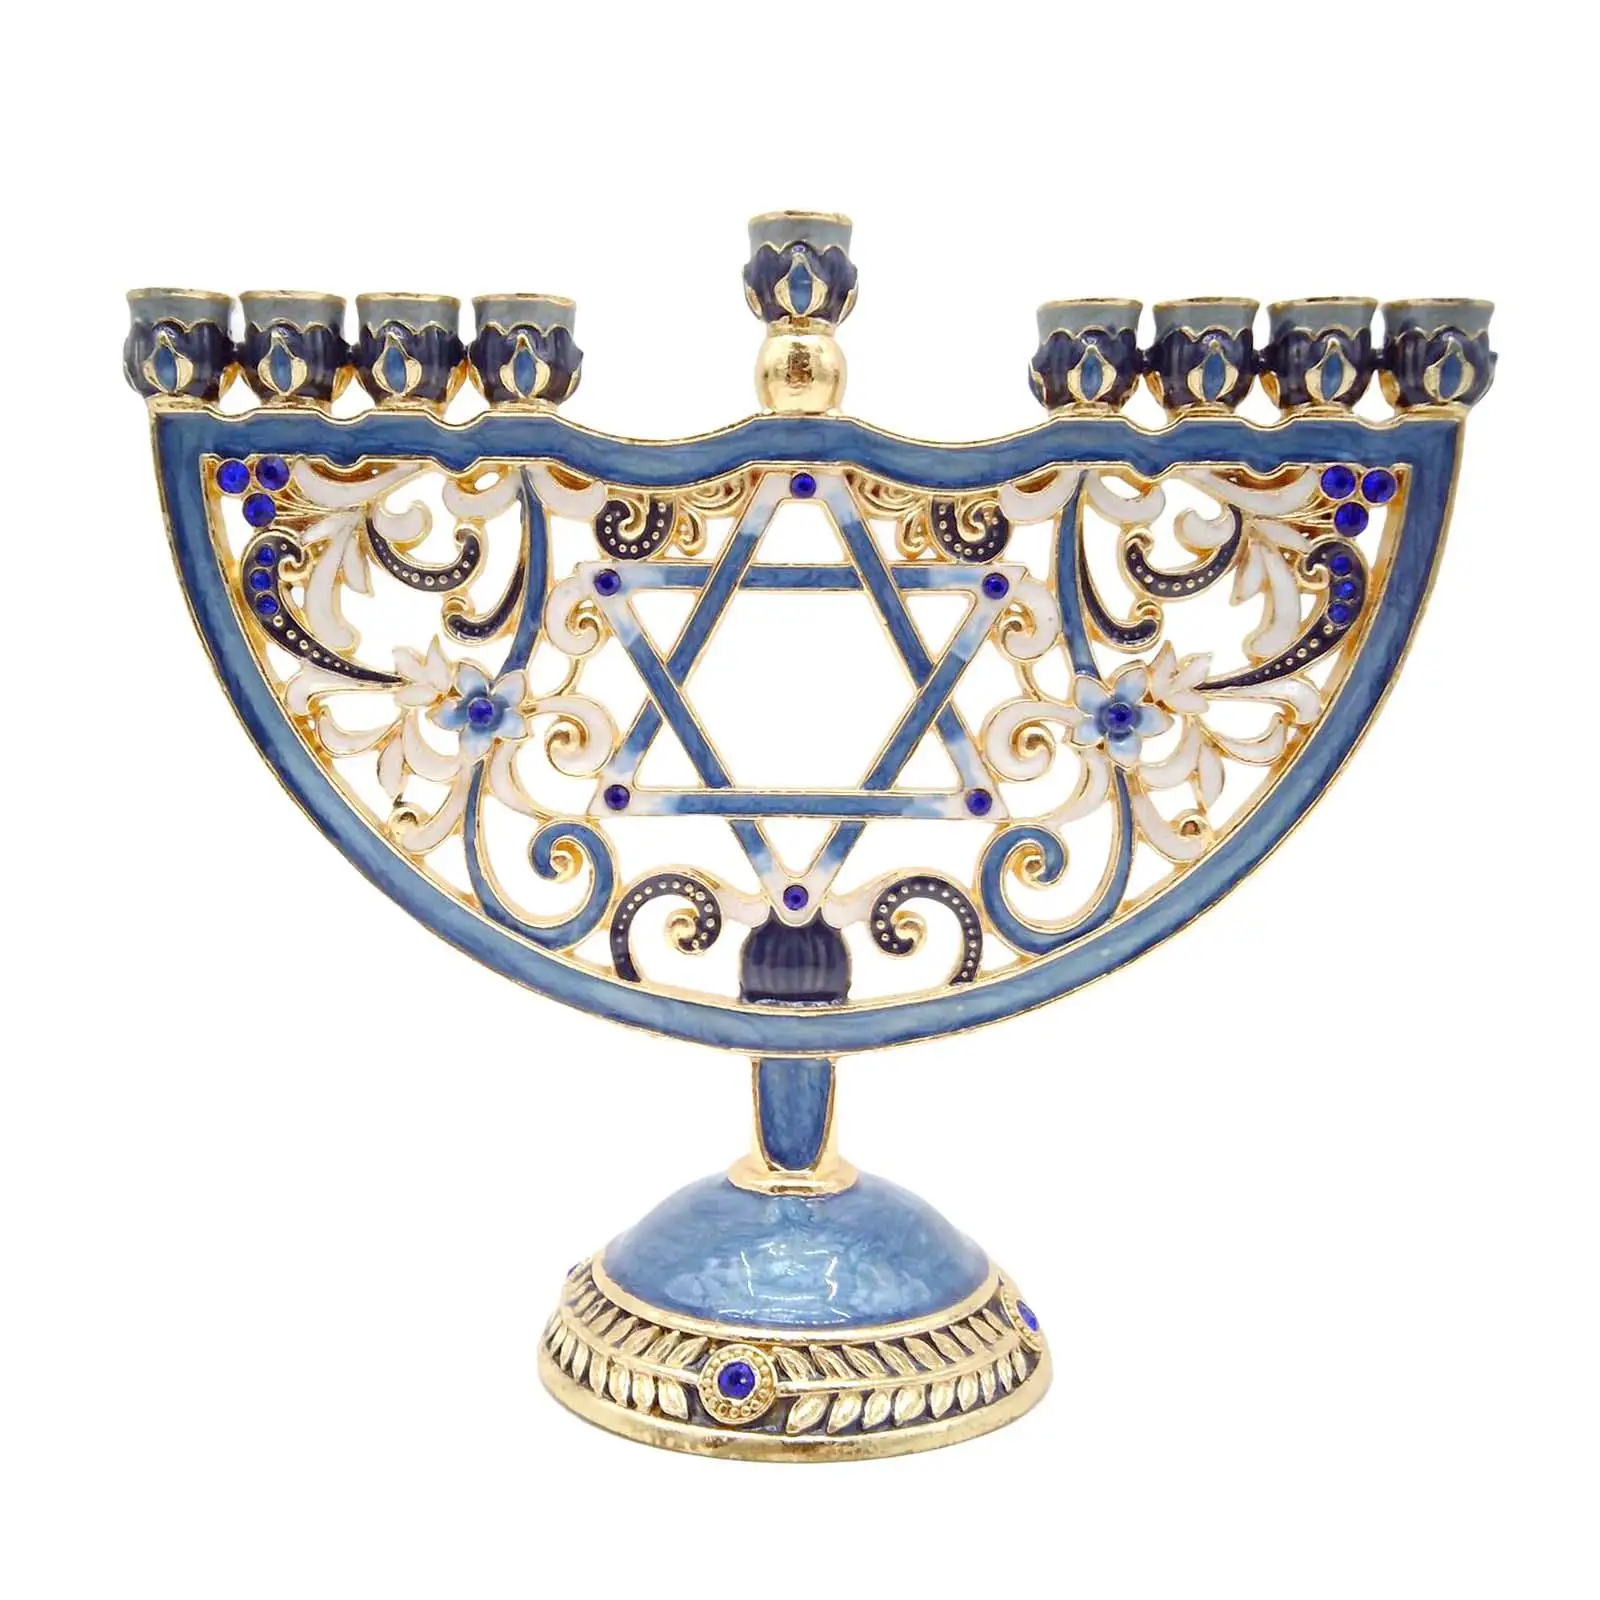 Enameled Metal Menorah Embellished with Jeweled Accents Candle Holder